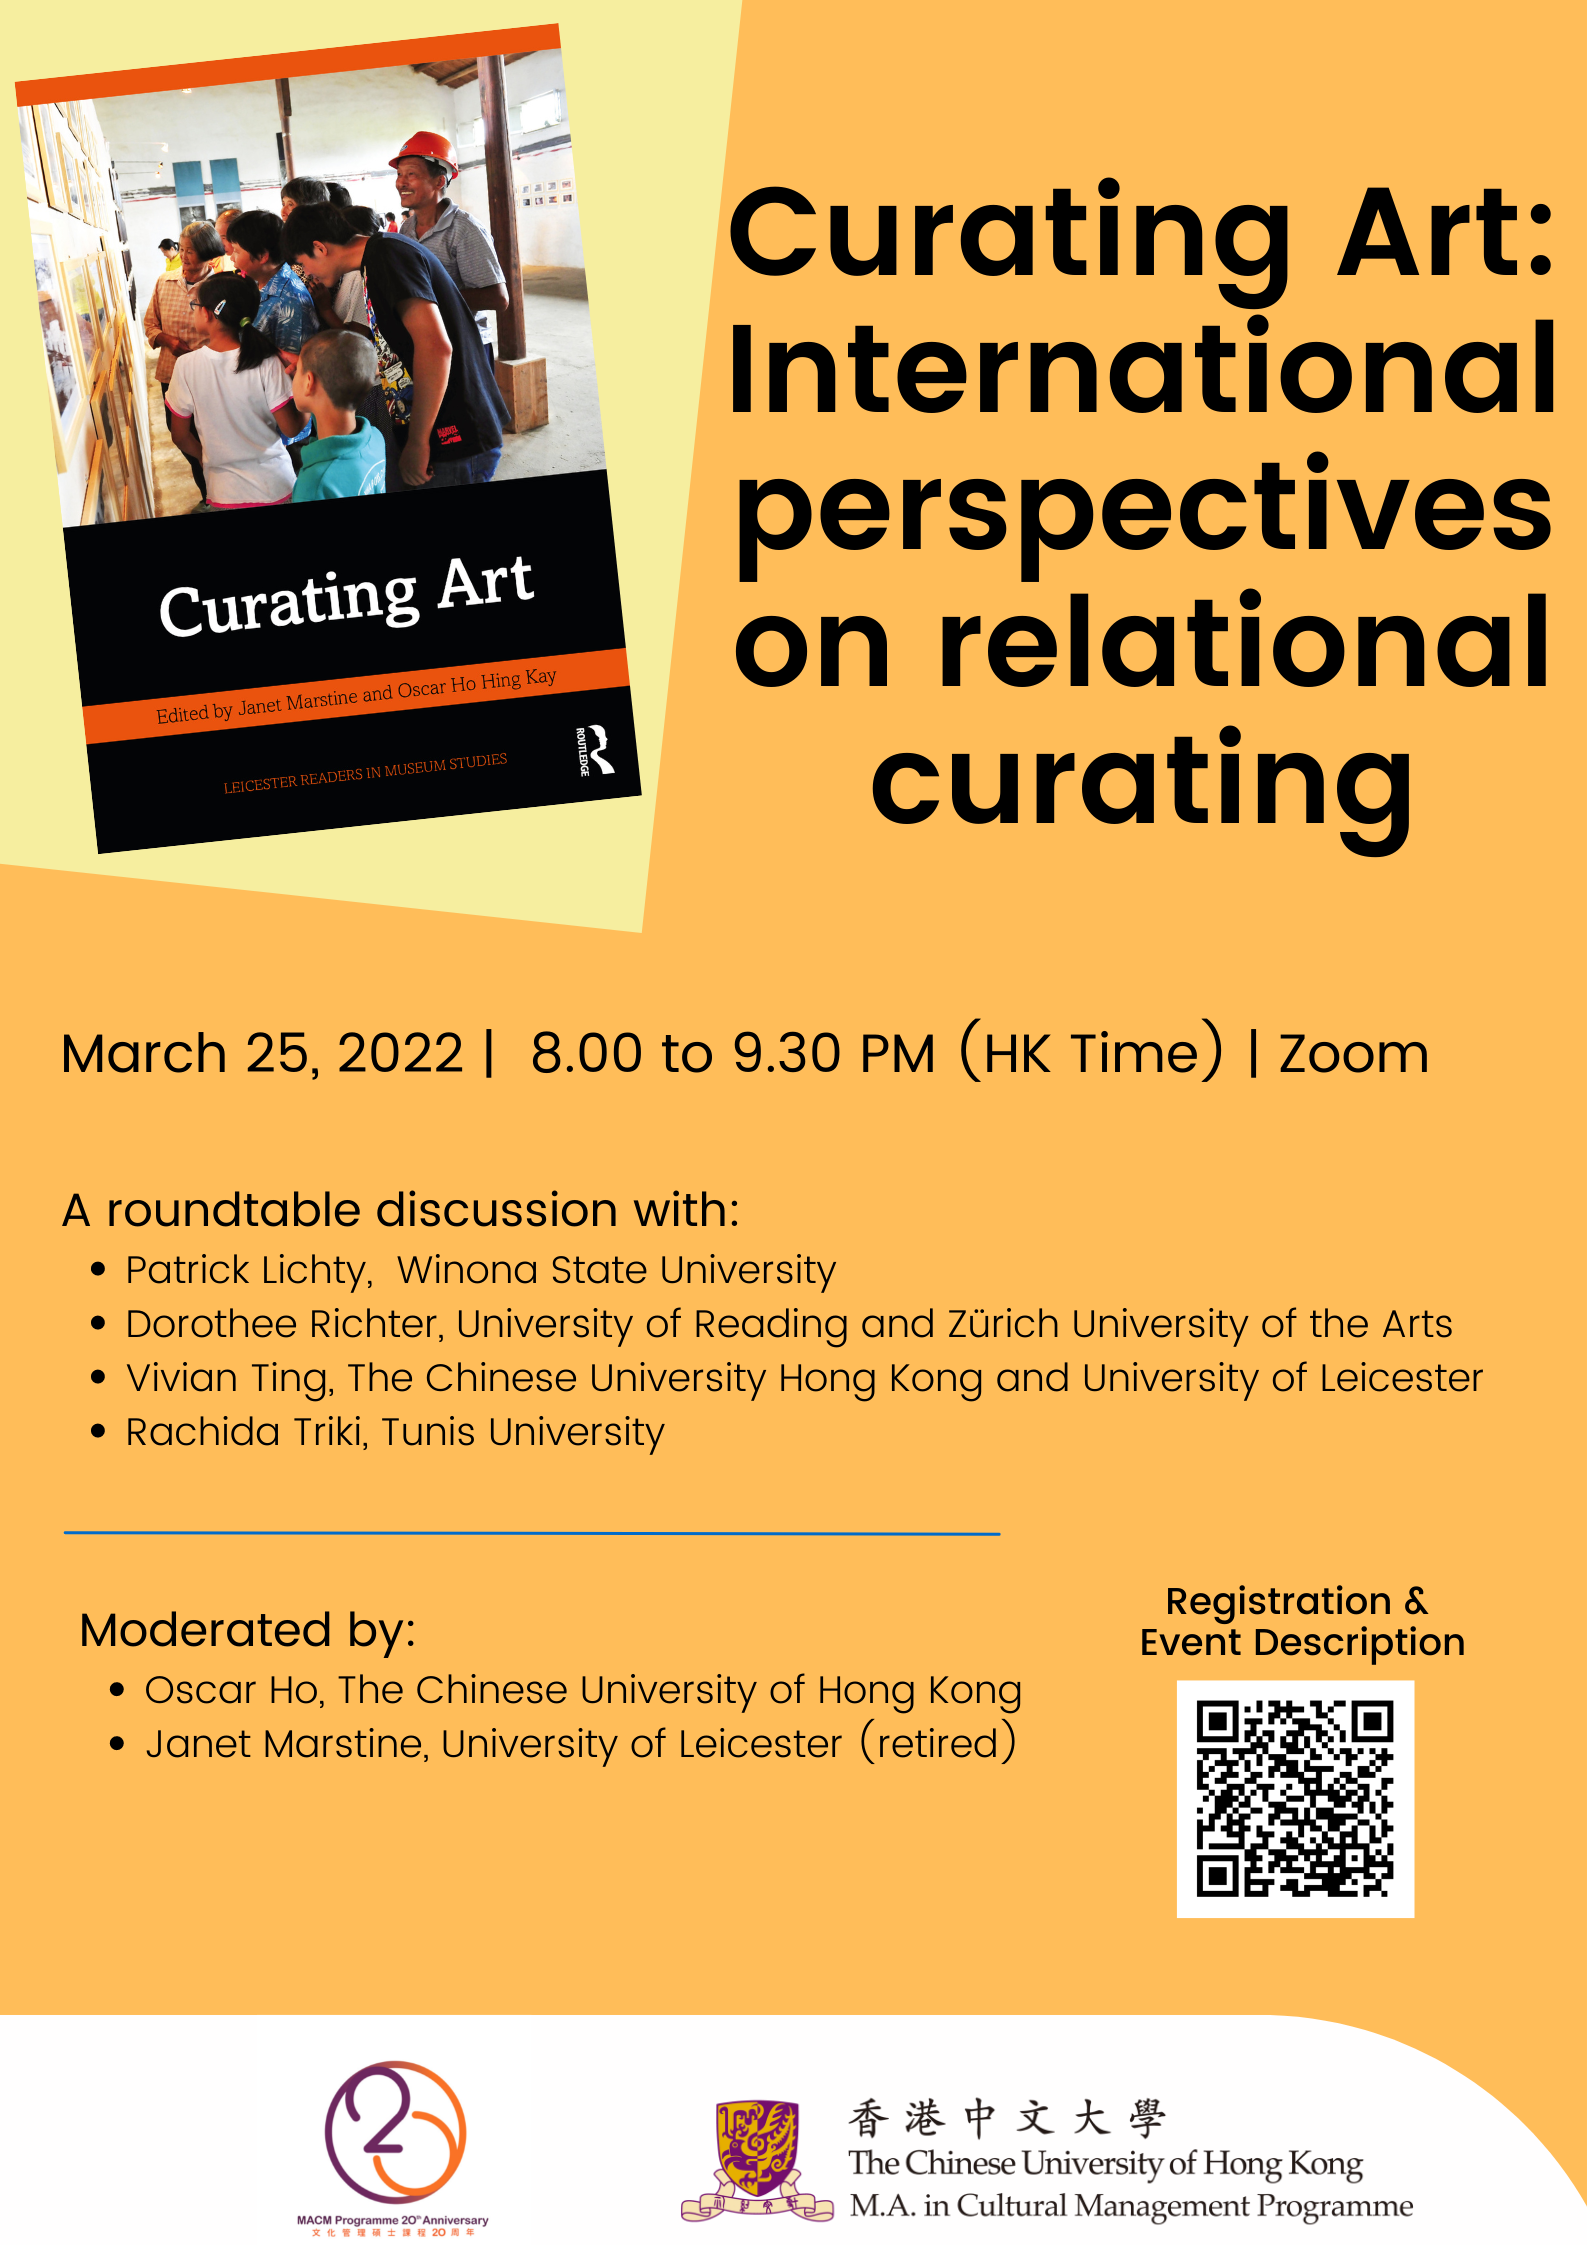 Curating Art: International perspectives on relational curating